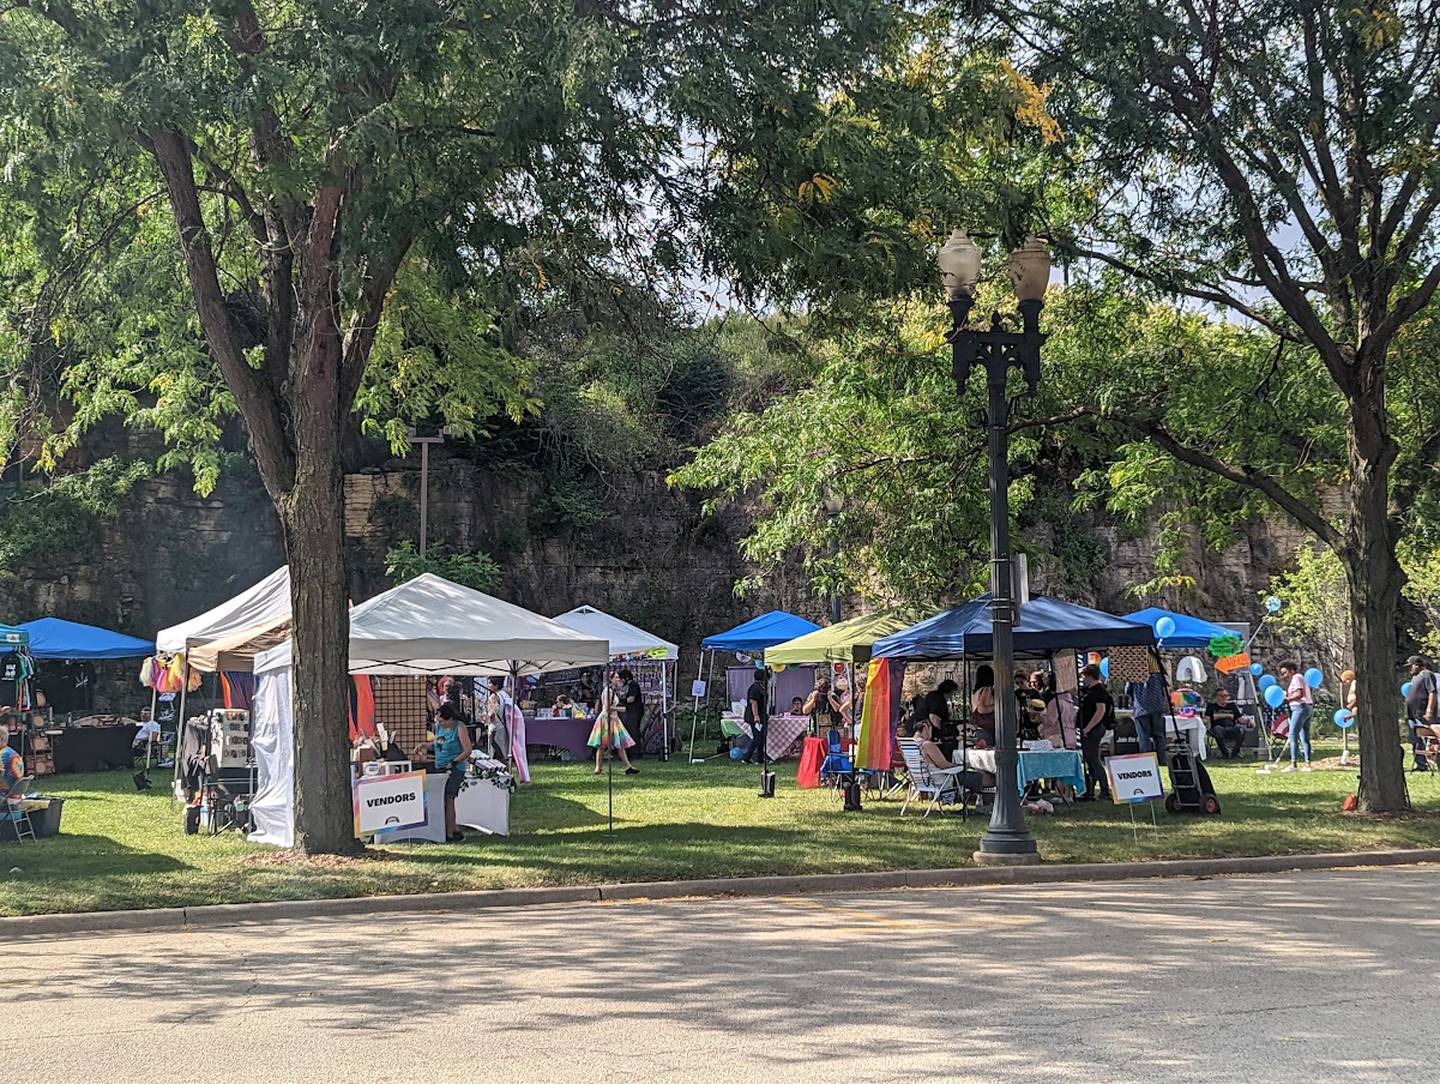 The Joliet Pride Network held its third Joliet PrideFest event on Saturday, Sept. 17, 2022, at the Billie Limacher Bicentennial Park and Theatre in Joliet. The family friendly event included an all-age drag show, live music, food, and activities for children and teens.